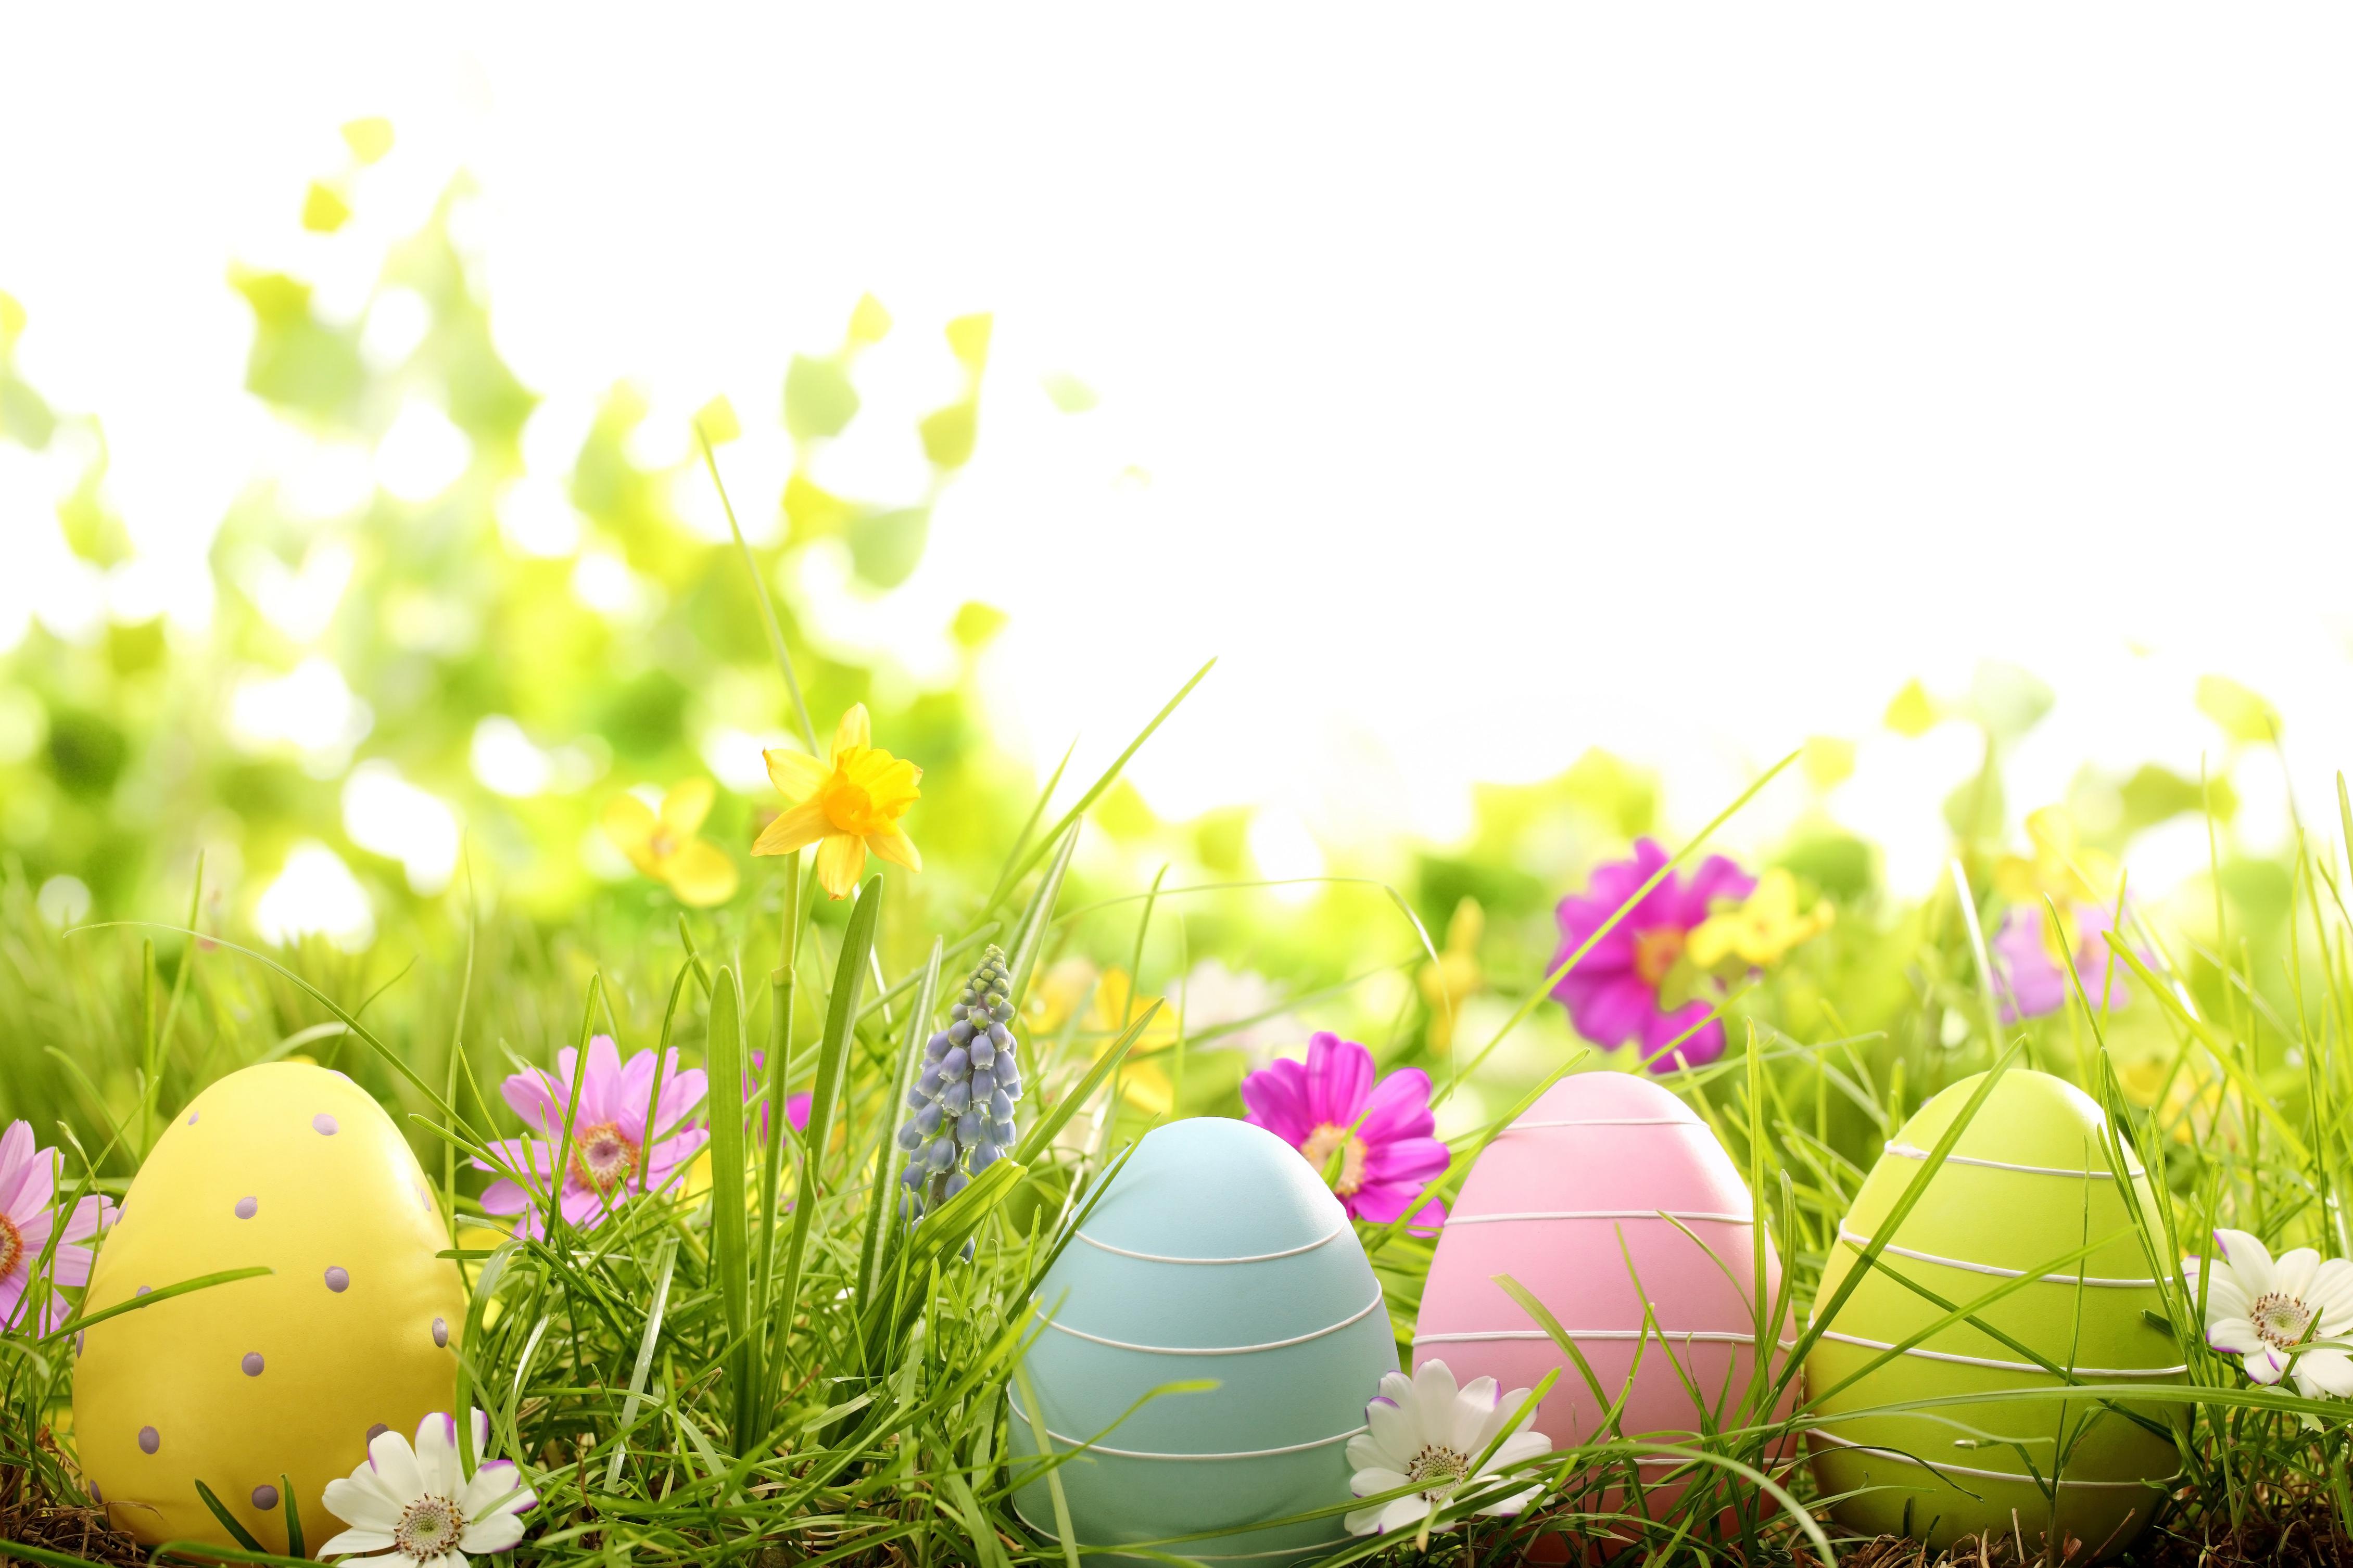 Gallery For Gt Pastel Easter Eggs Background